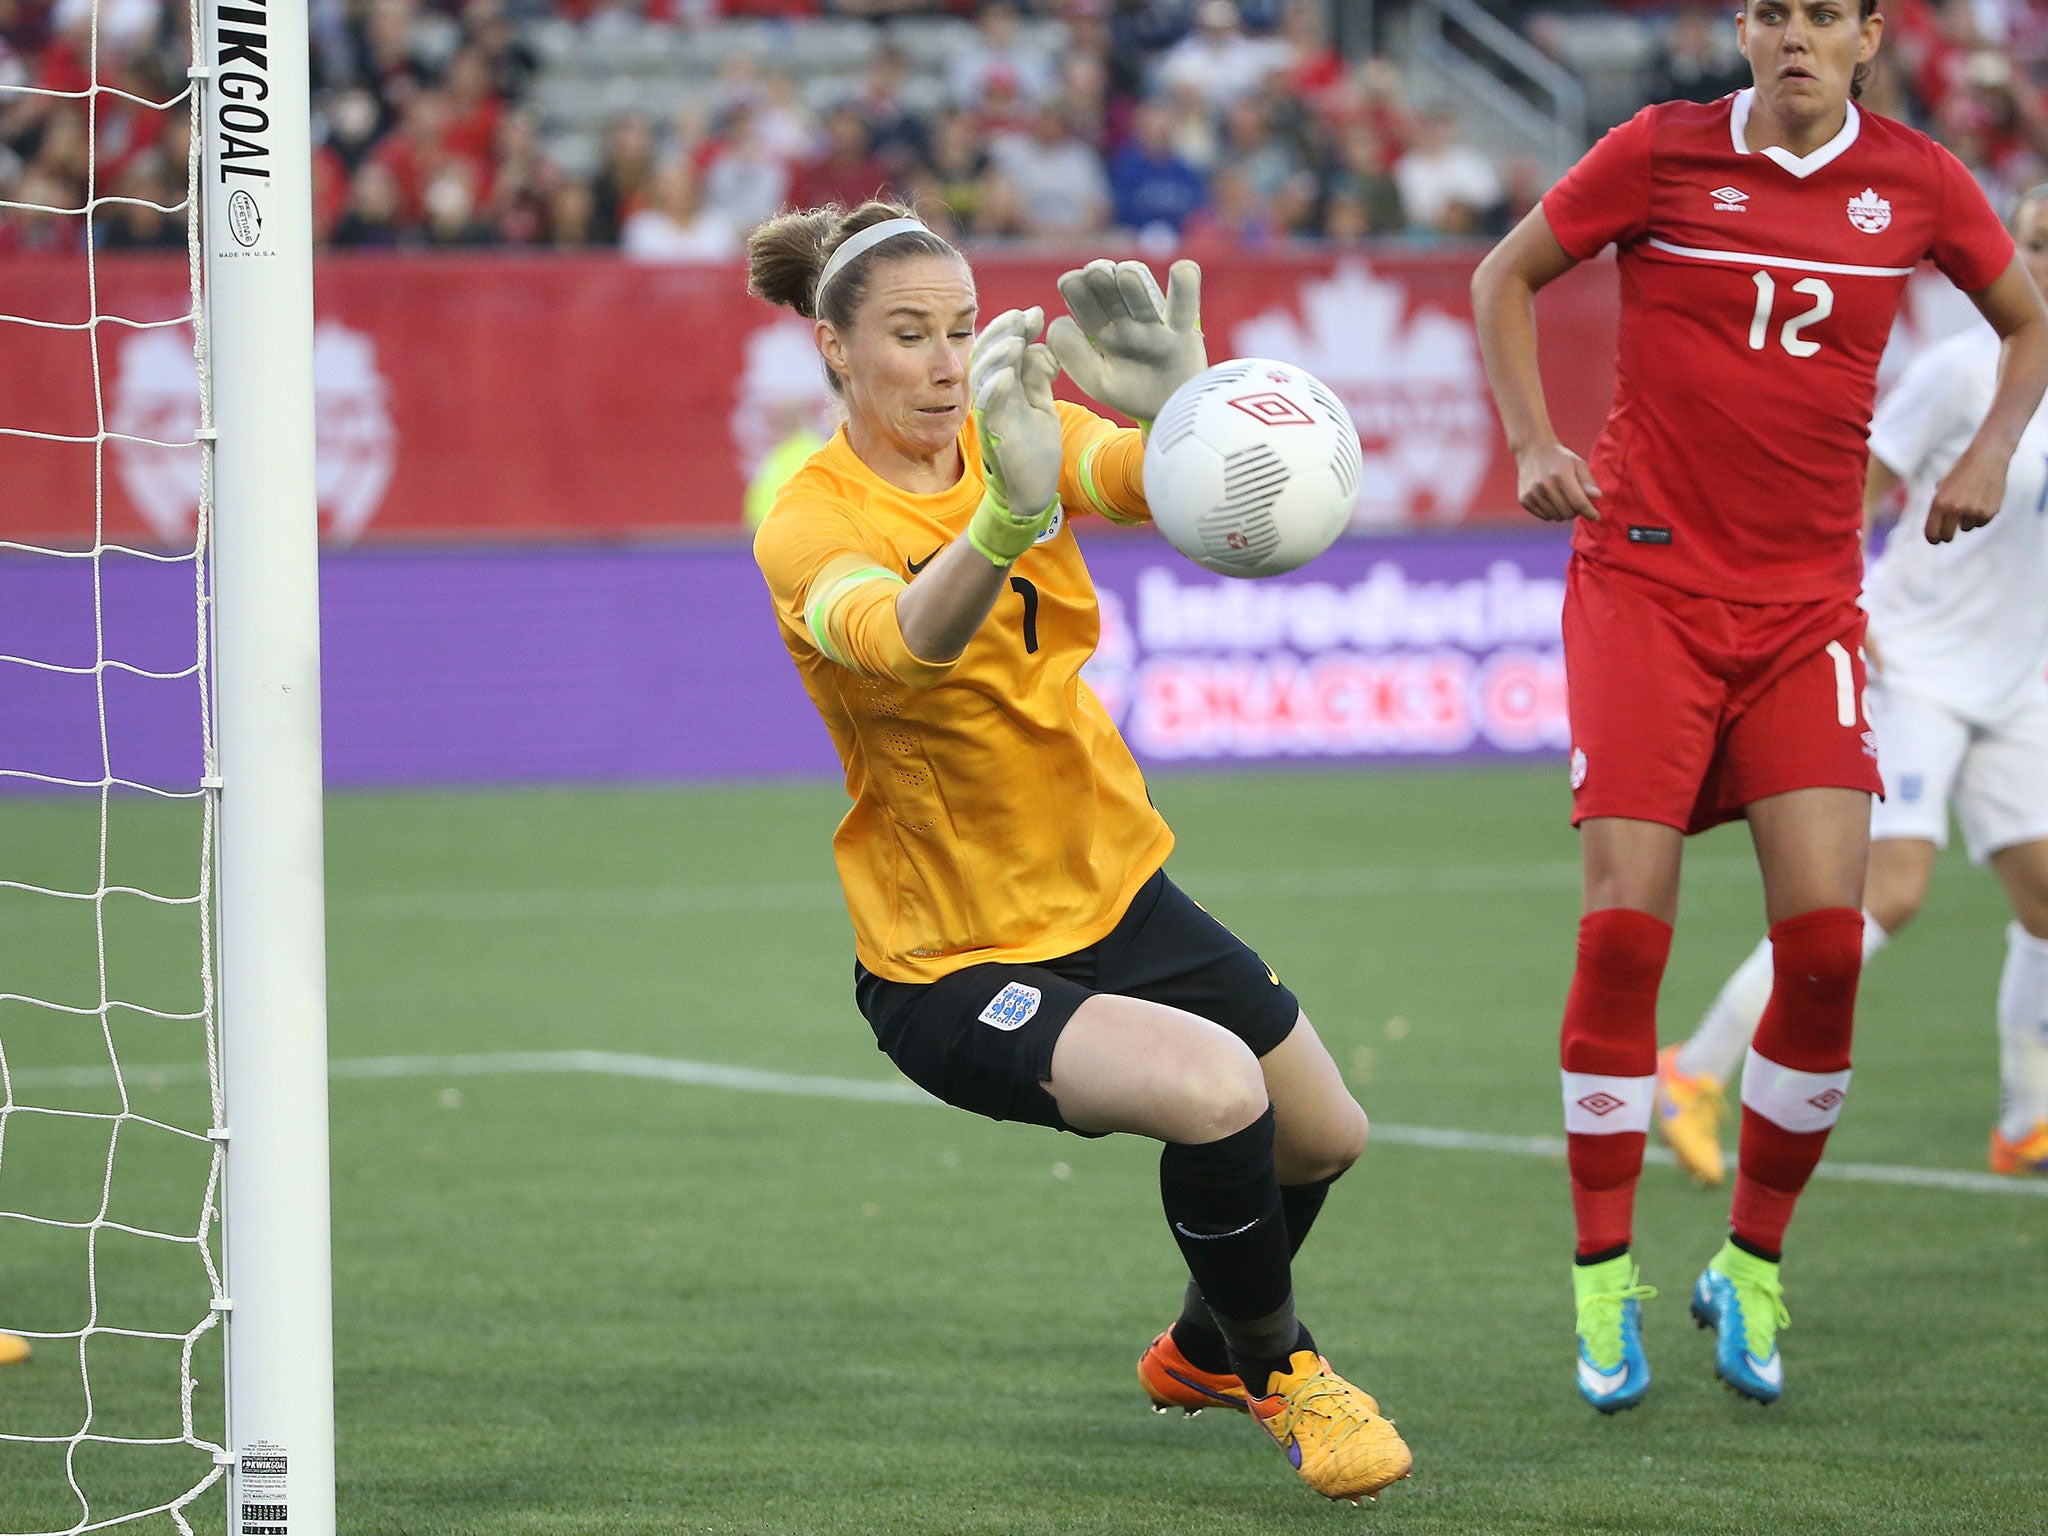 Manchester City and England goalkeeper Karen Bardsley is preparing for the fourth major tournament of her career